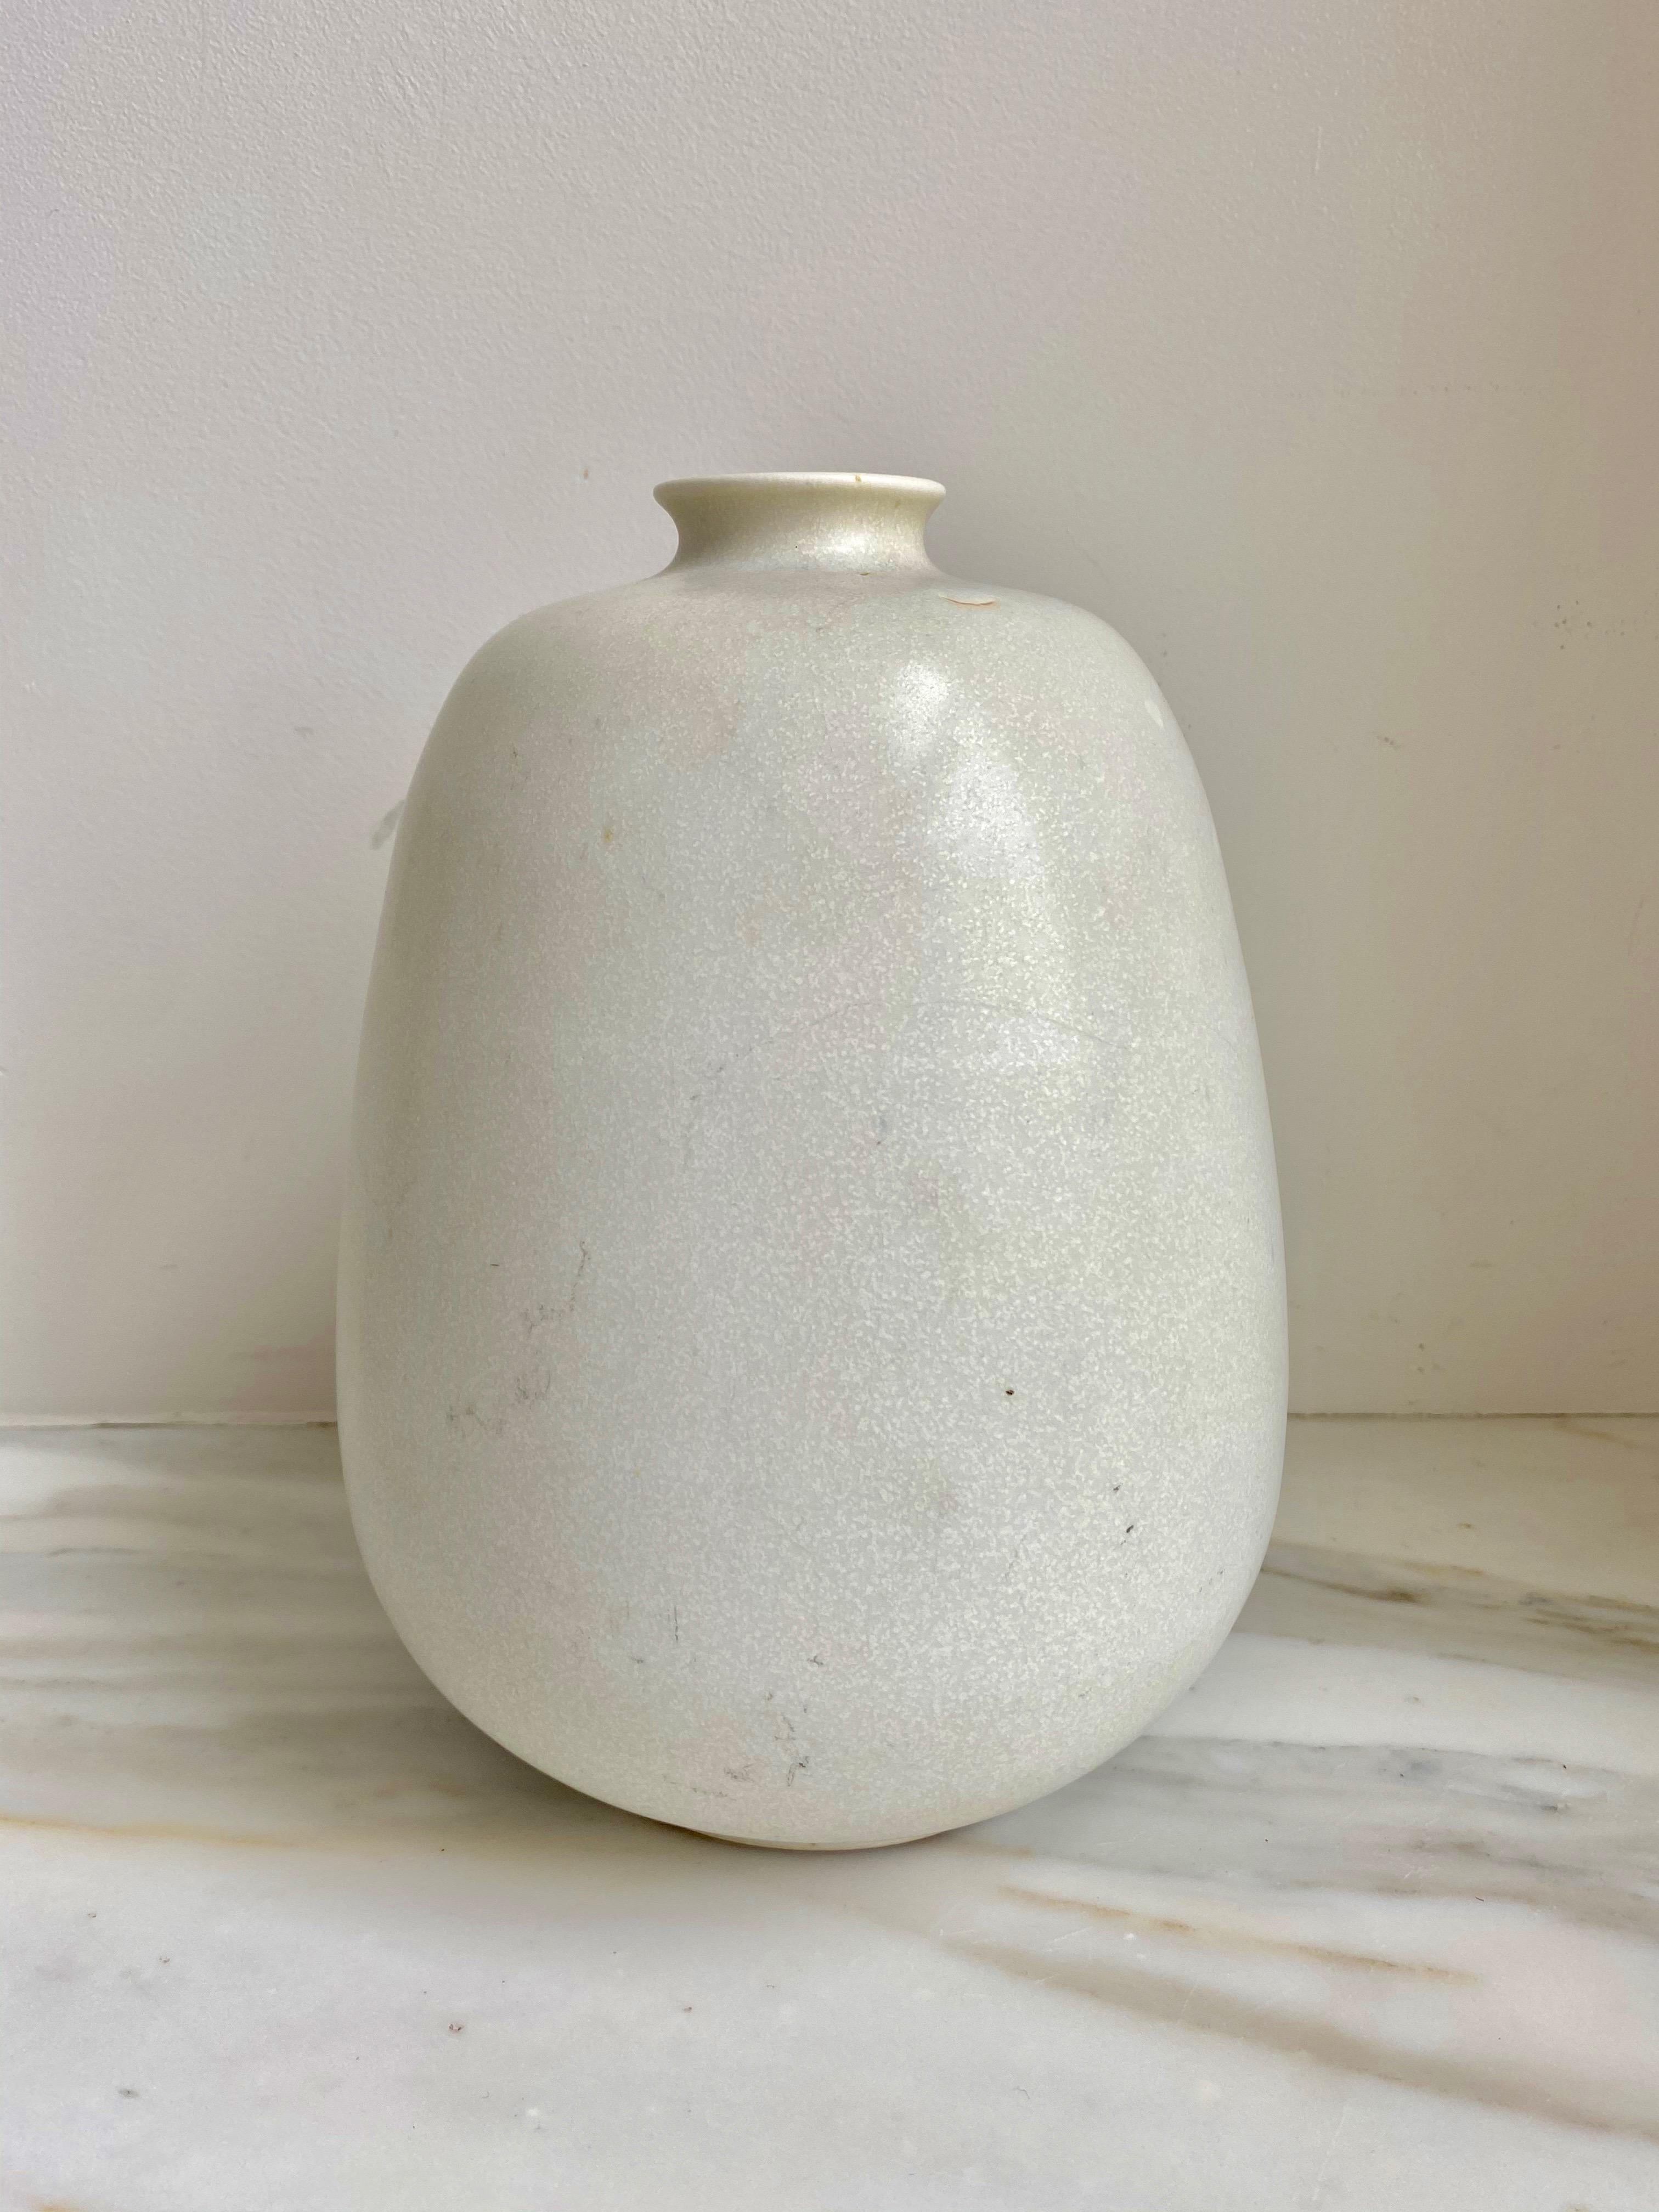 Stoneware vase with matte white glaze by Erich and Ingrid Triller 

Tobo, Sweden,

circa 1940s

Signed 